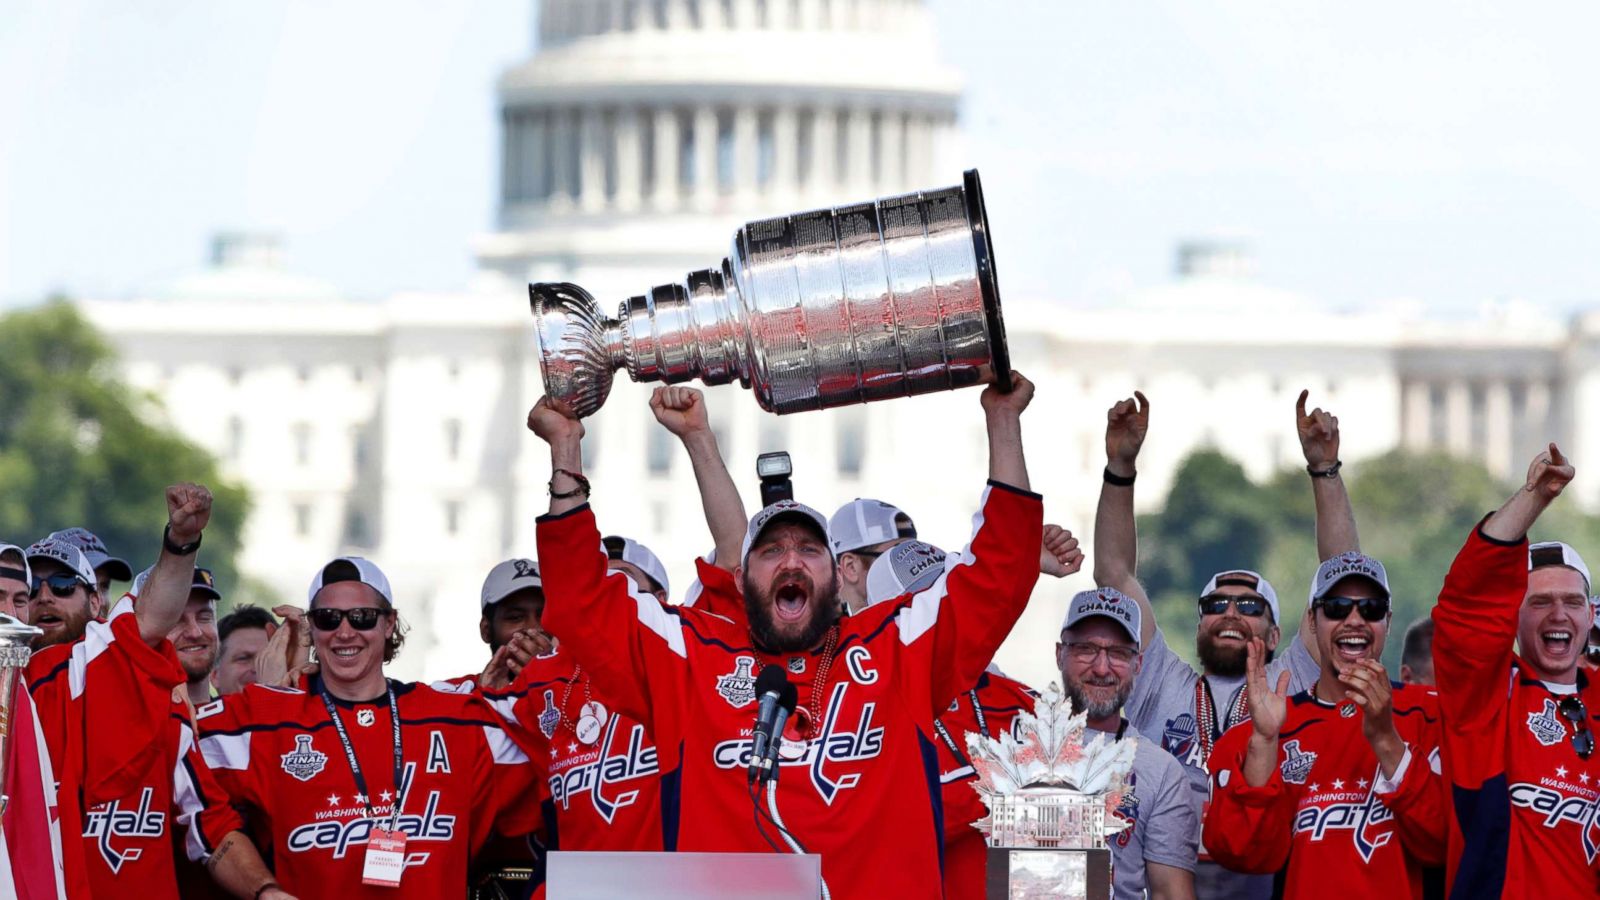 Capitals' black aces take in Stanley Cup win - Washington Times